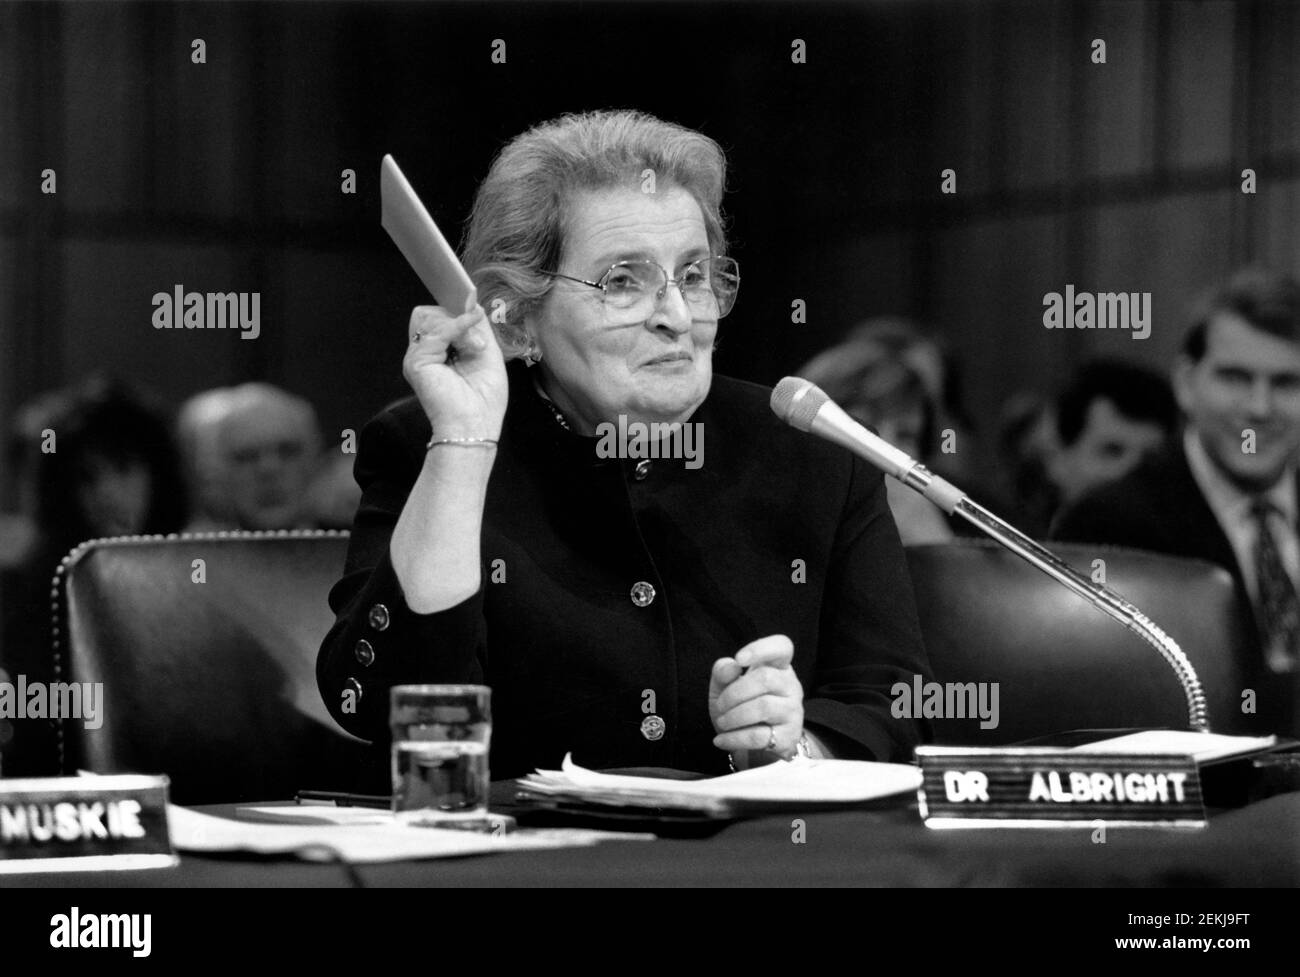 Madeleine K. Albright before the Senate Foreign Relations Committee during her confirmation hearing to be U.S. Representative to UN, she is holding Copy of UN Charter, Washington, D.C., USA, R. Michael Jenkins, January 23, 1993 Stock Photo